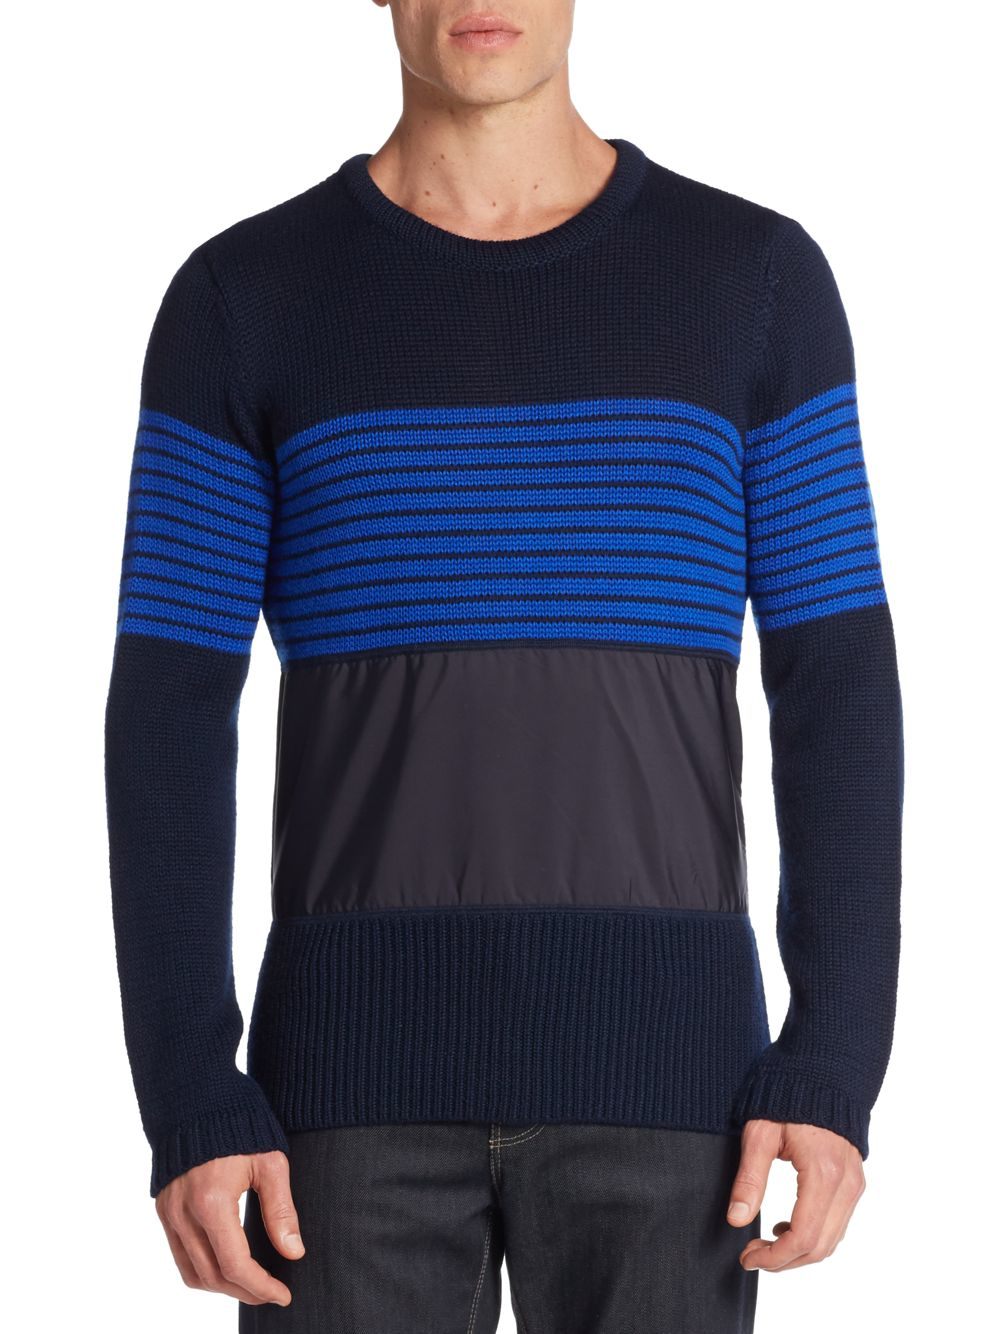 Lyst - Emporio Armani Striped Paneled-knit Sweater for Men